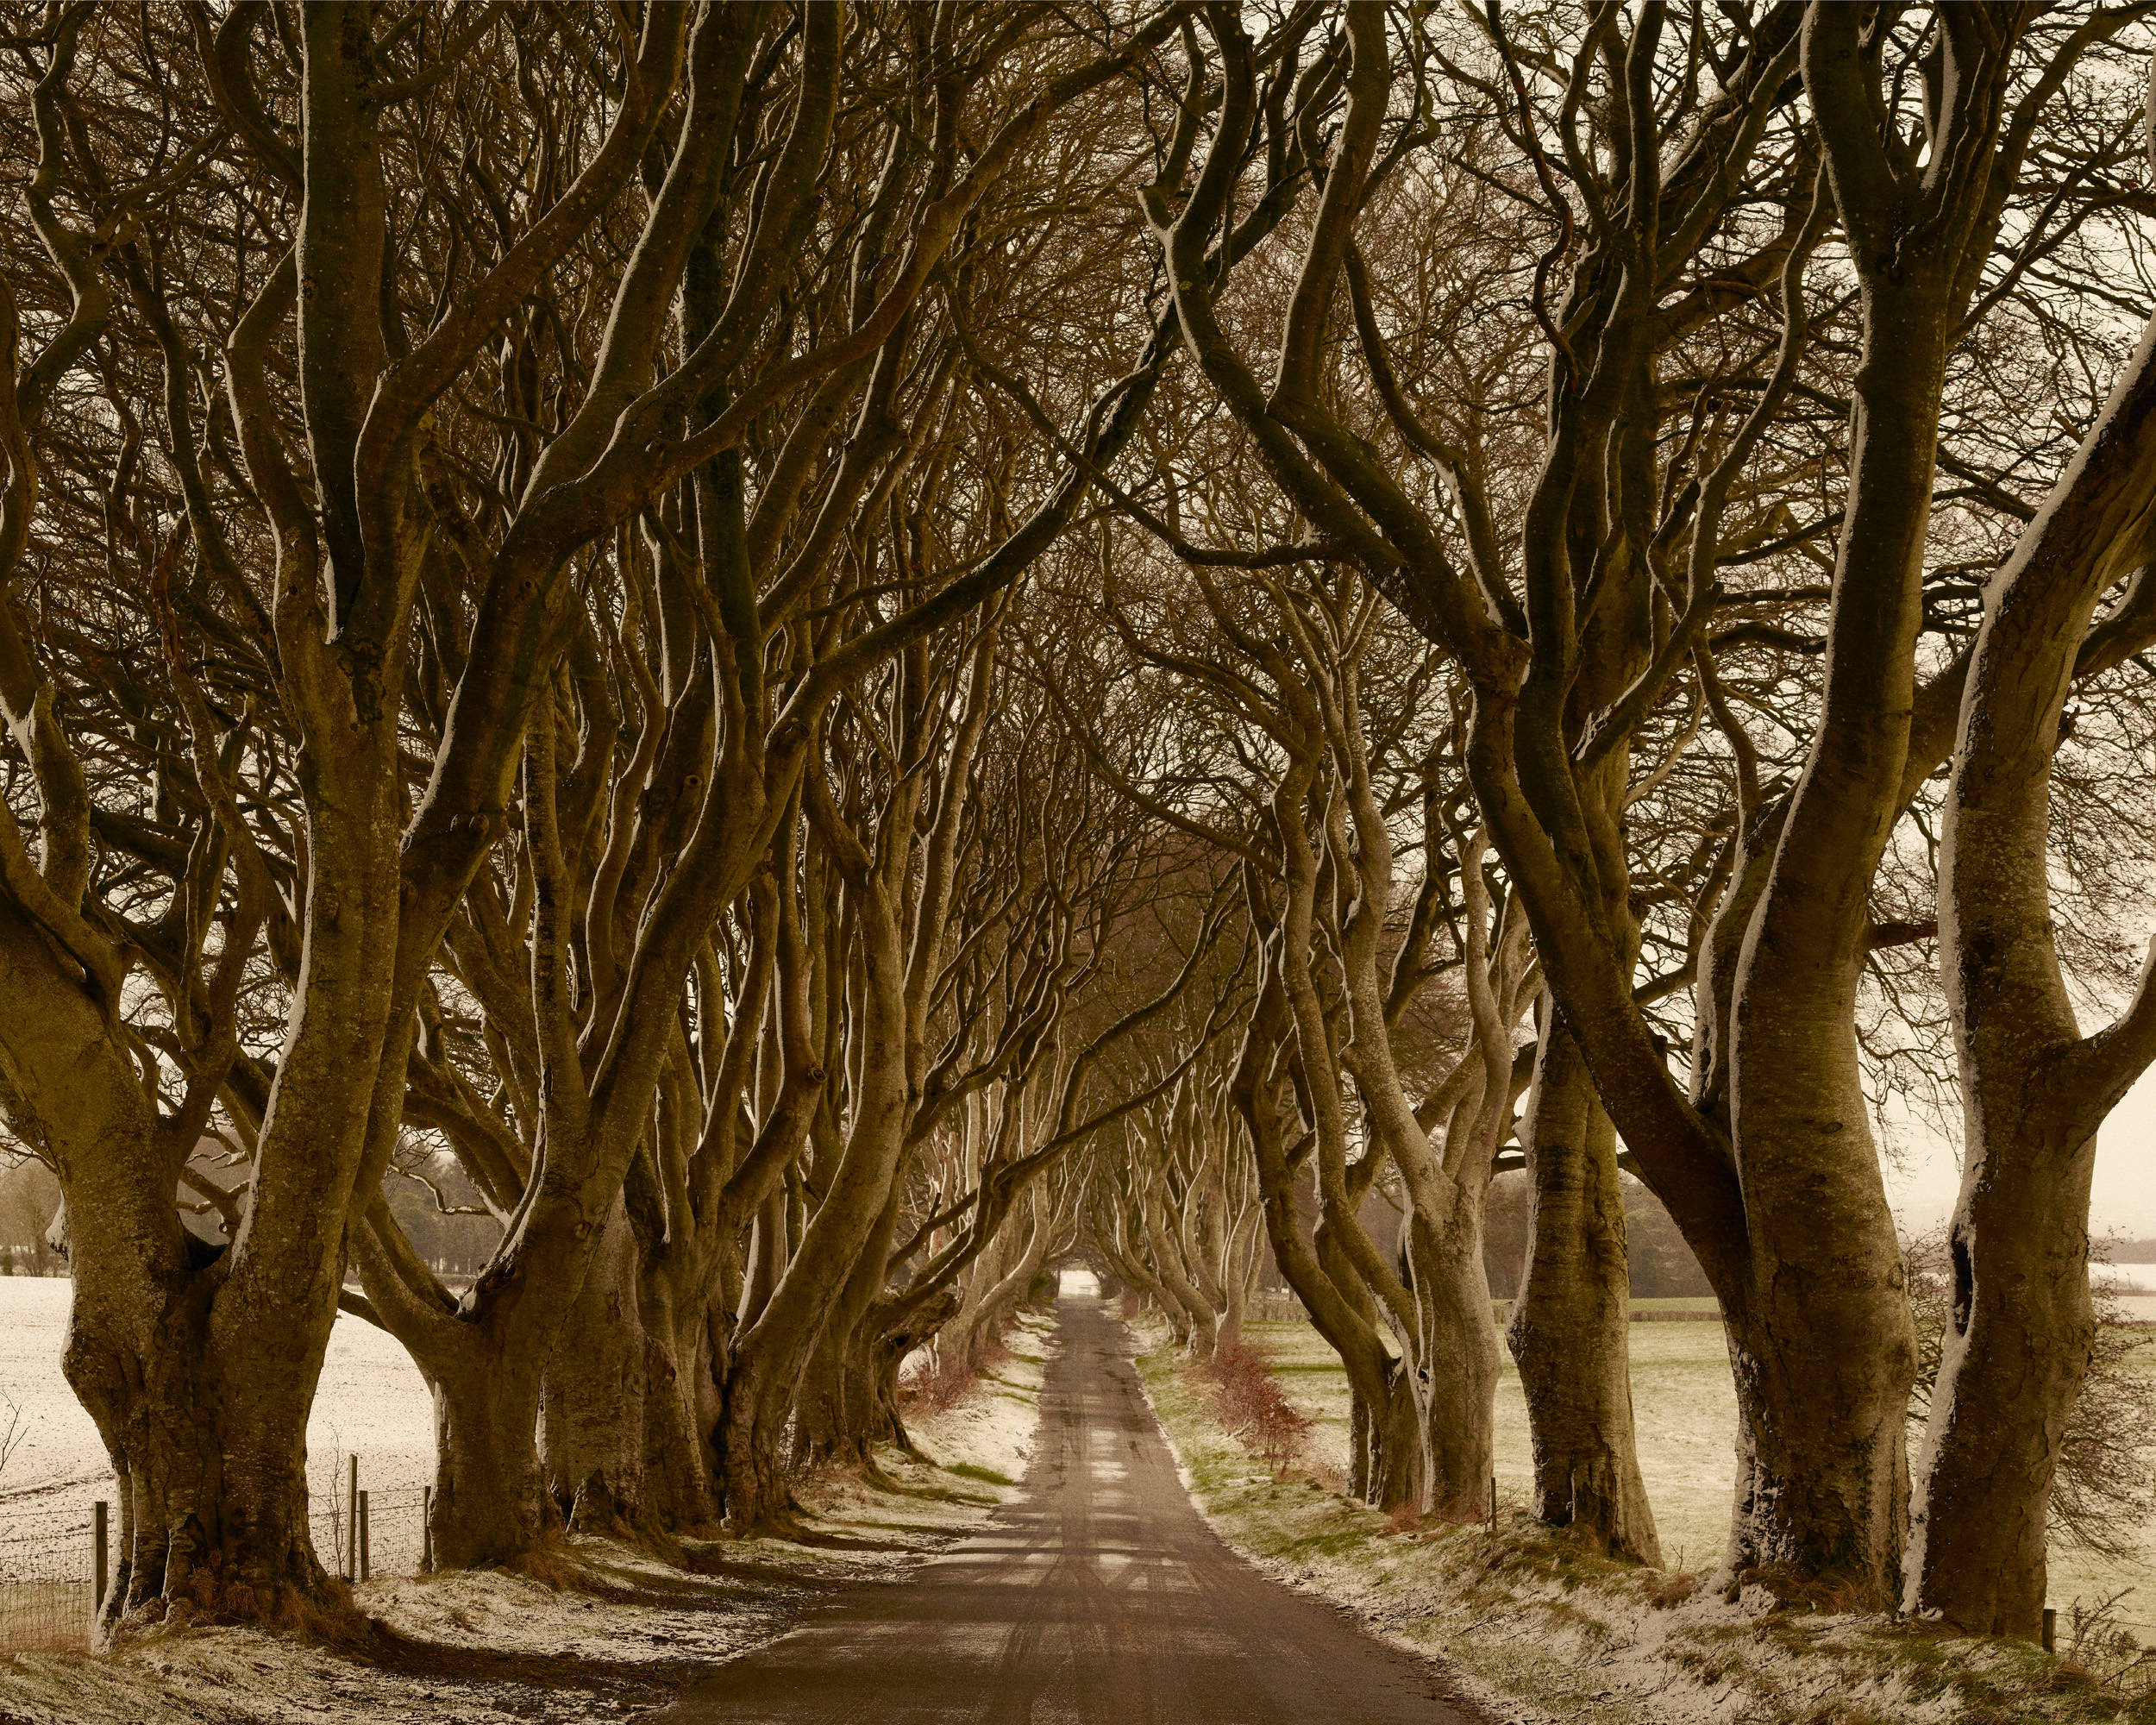 May 2022 – Mastermind Magazine / Game of Thrones landscapes